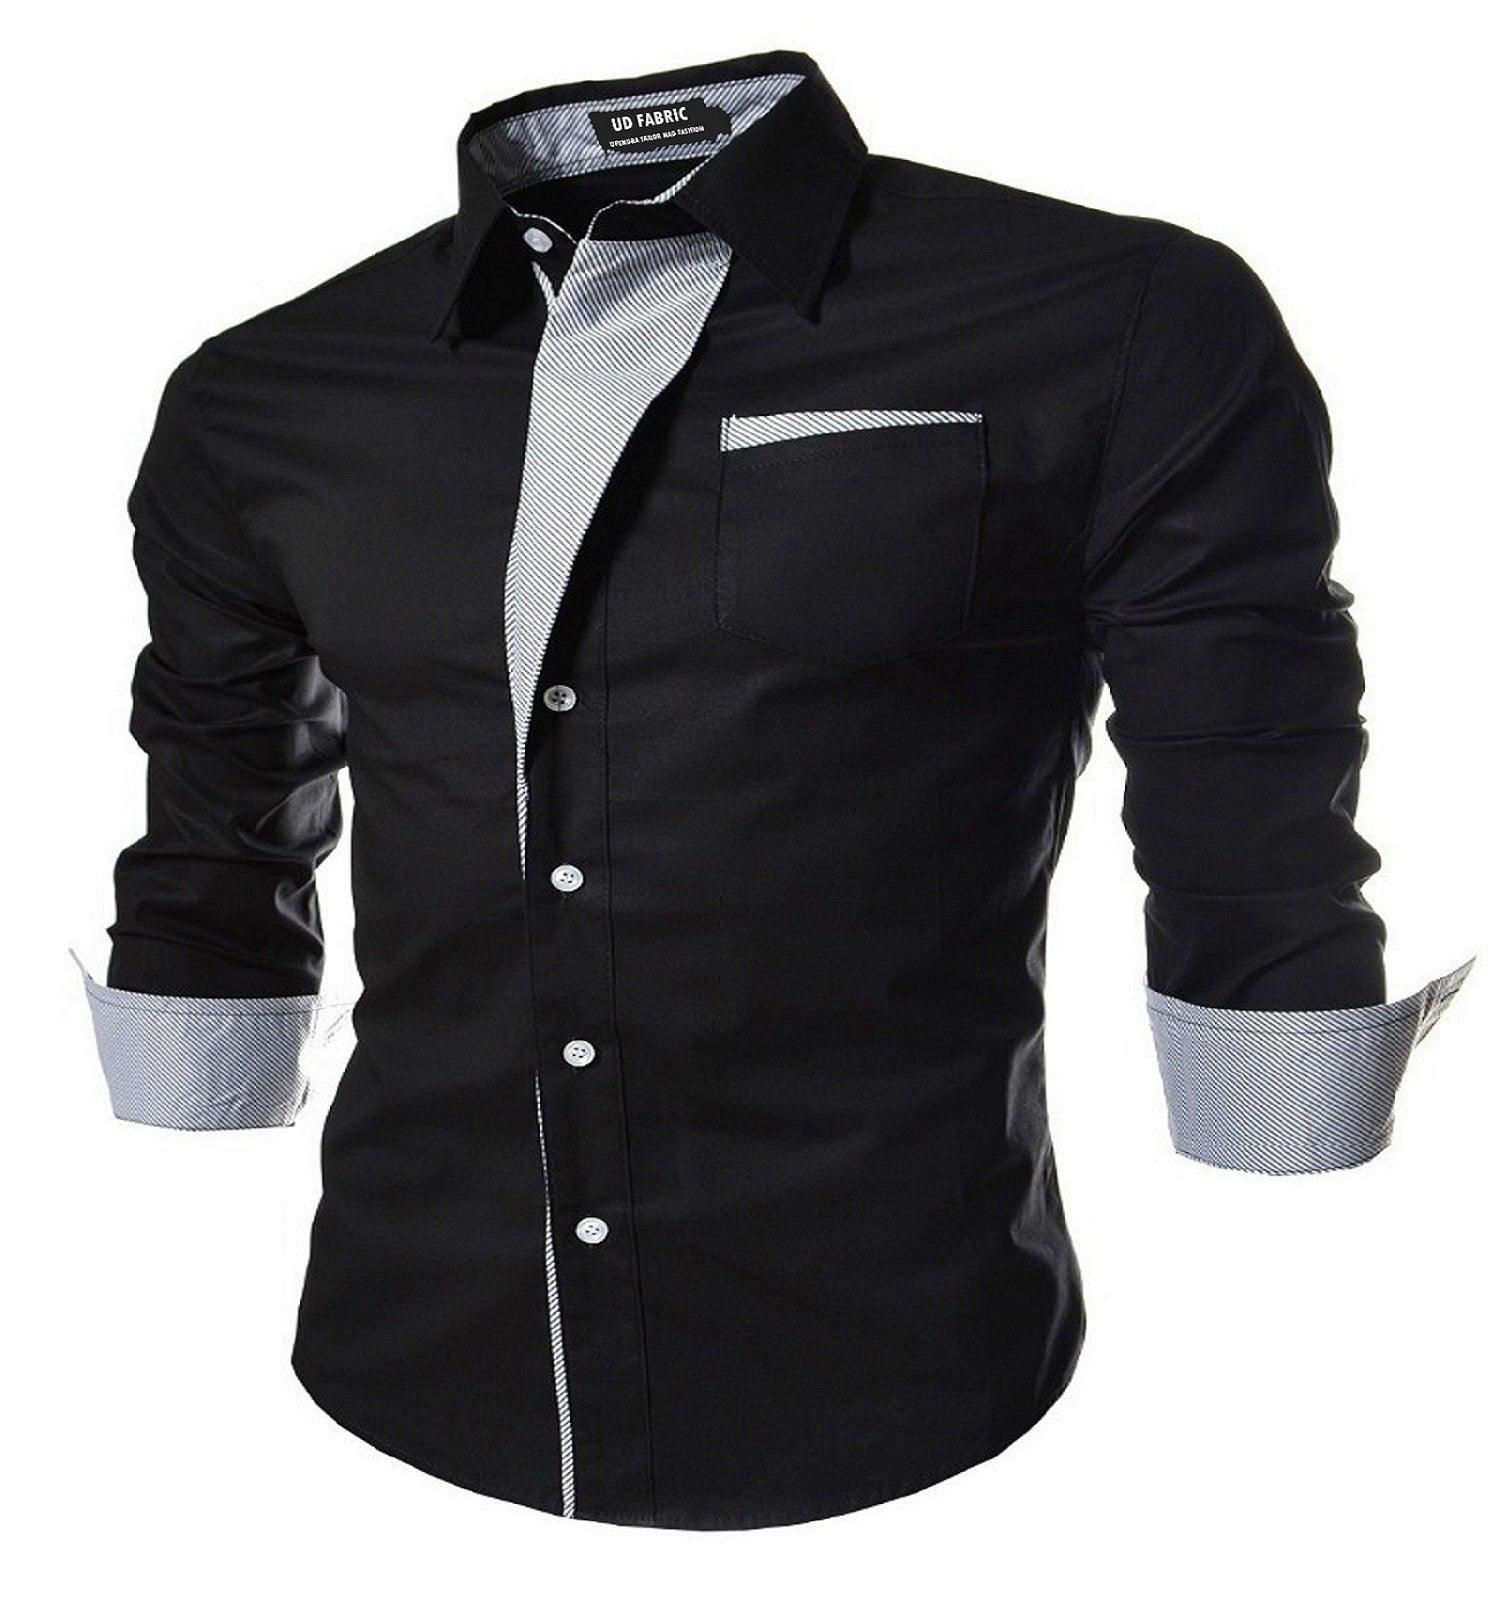 UDFABRIC Party-wear Shirt for Men's - White - UD FABRIC - Your Style our Design